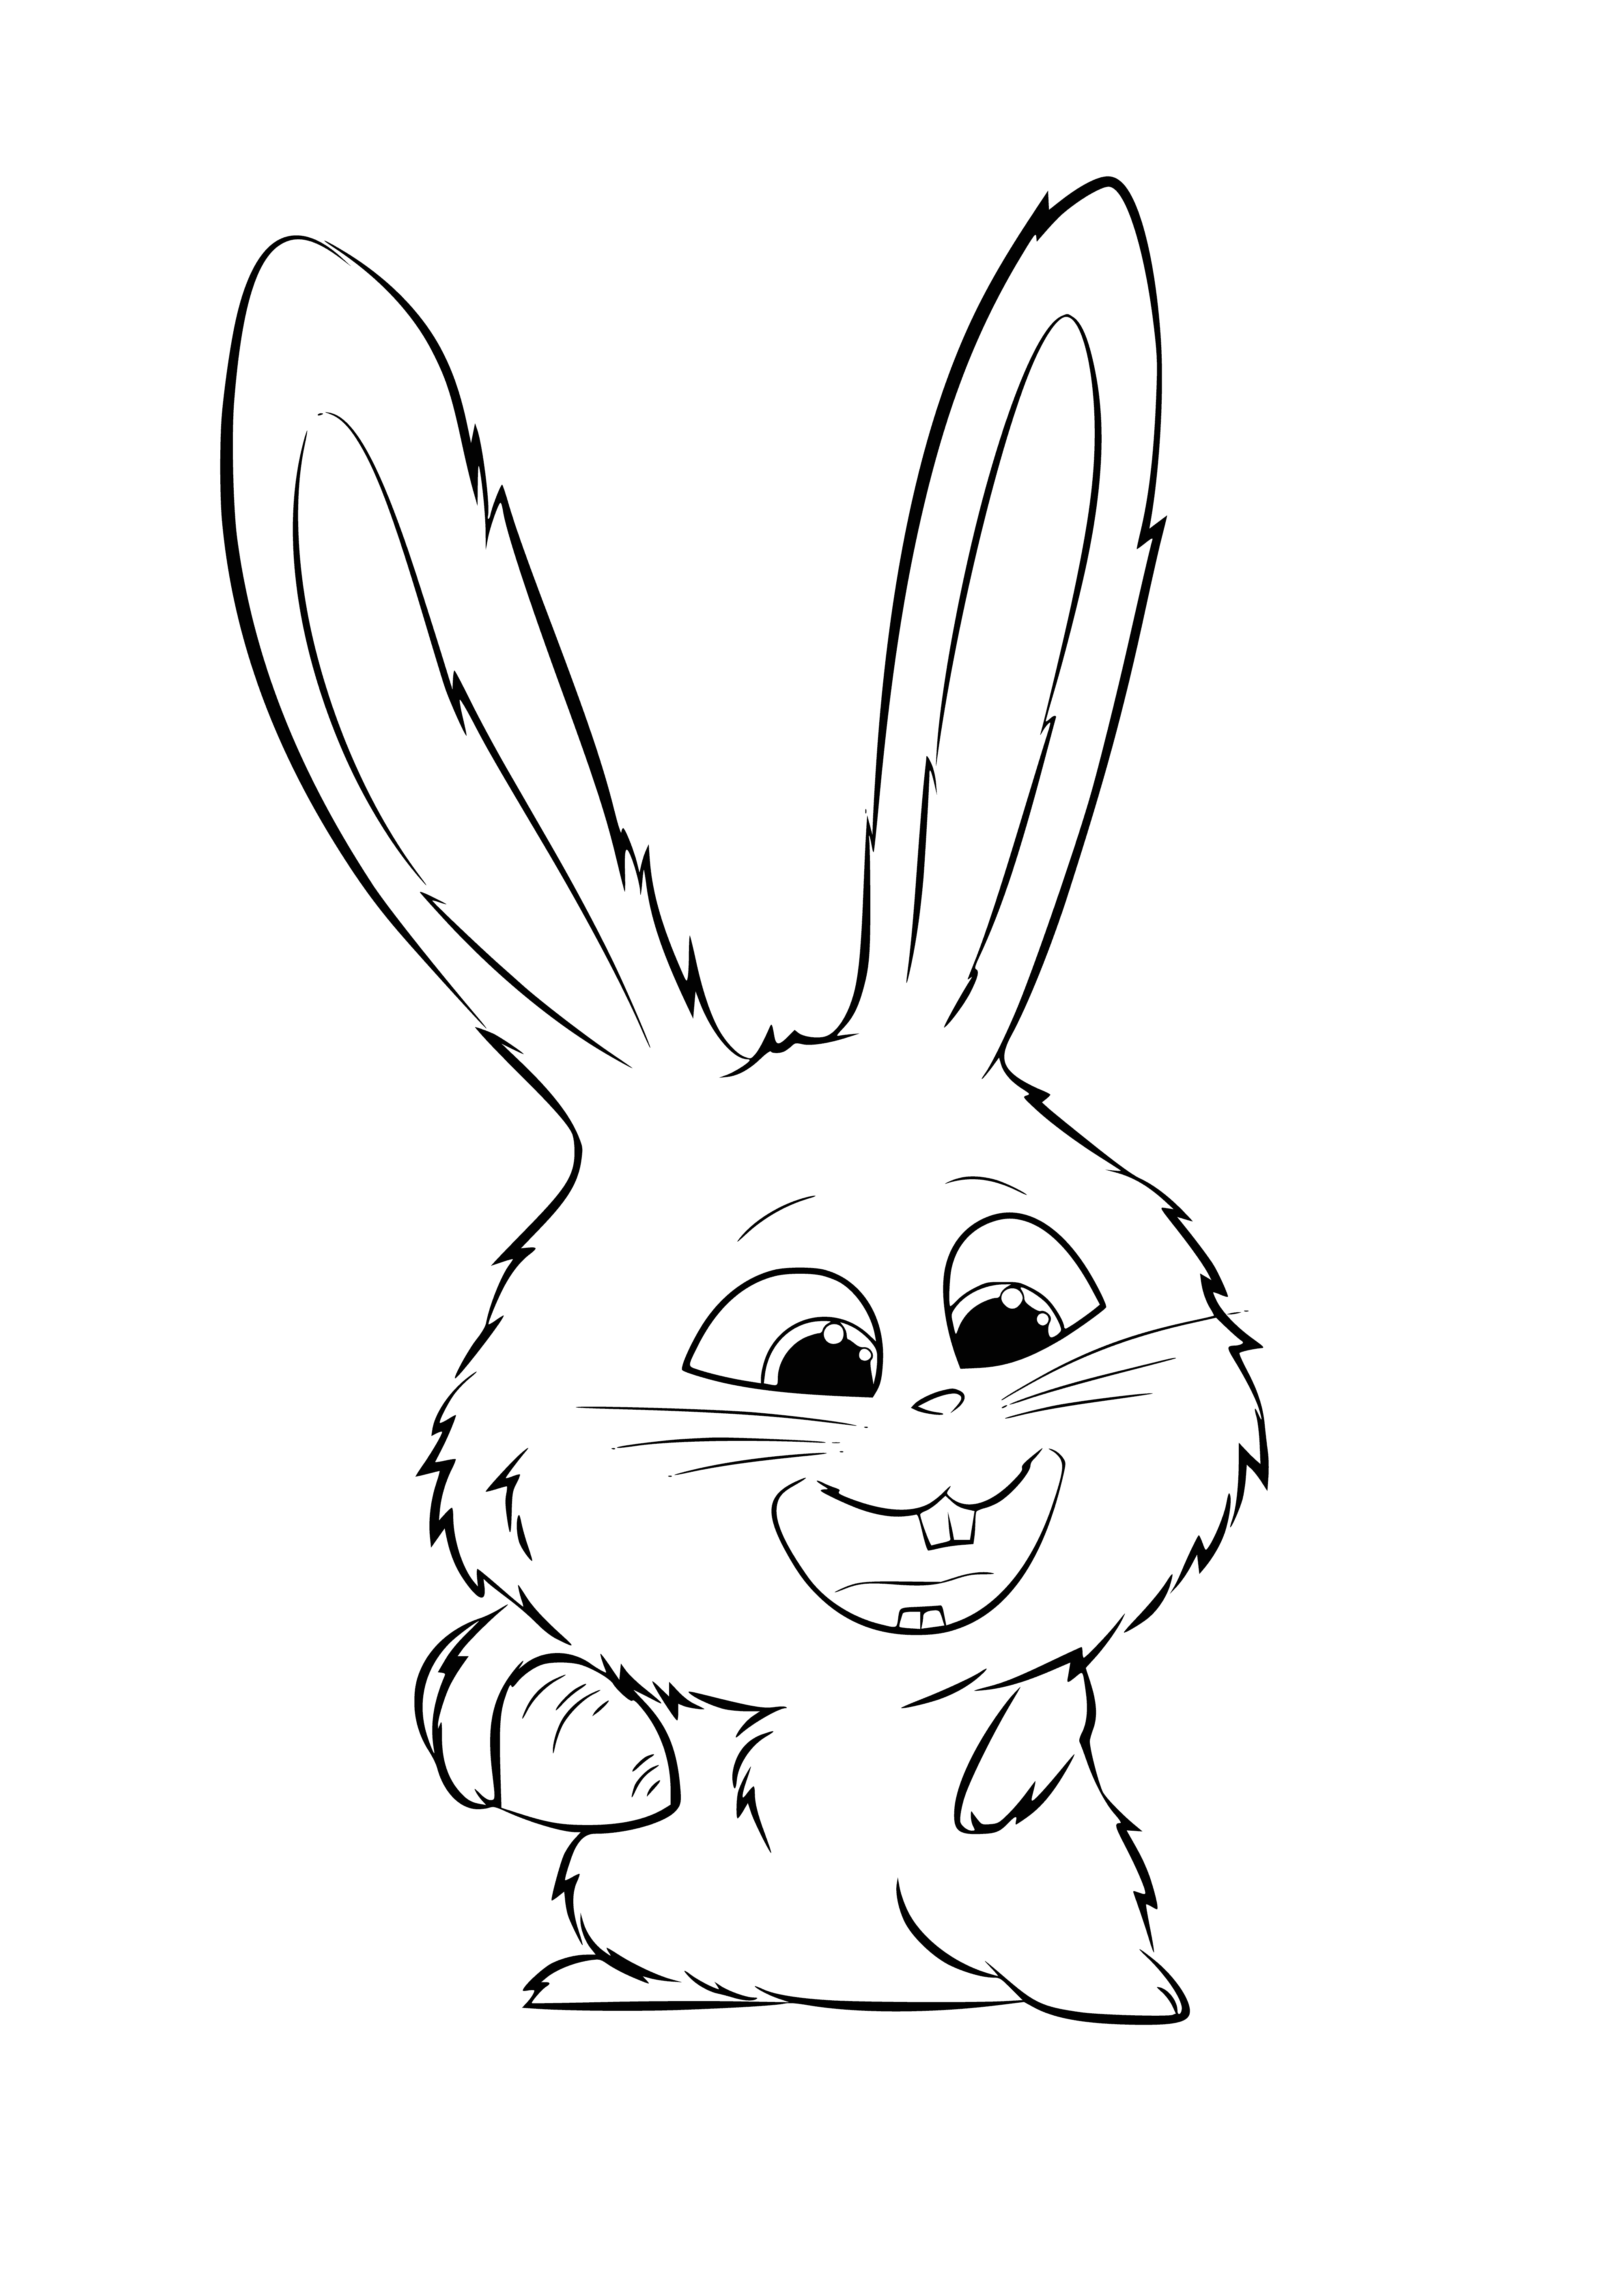 coloring page: Rabbit Snowball is a tough-yet-soft leader of an animal gang & best friends with Max, the dog. Enjoys their time together.